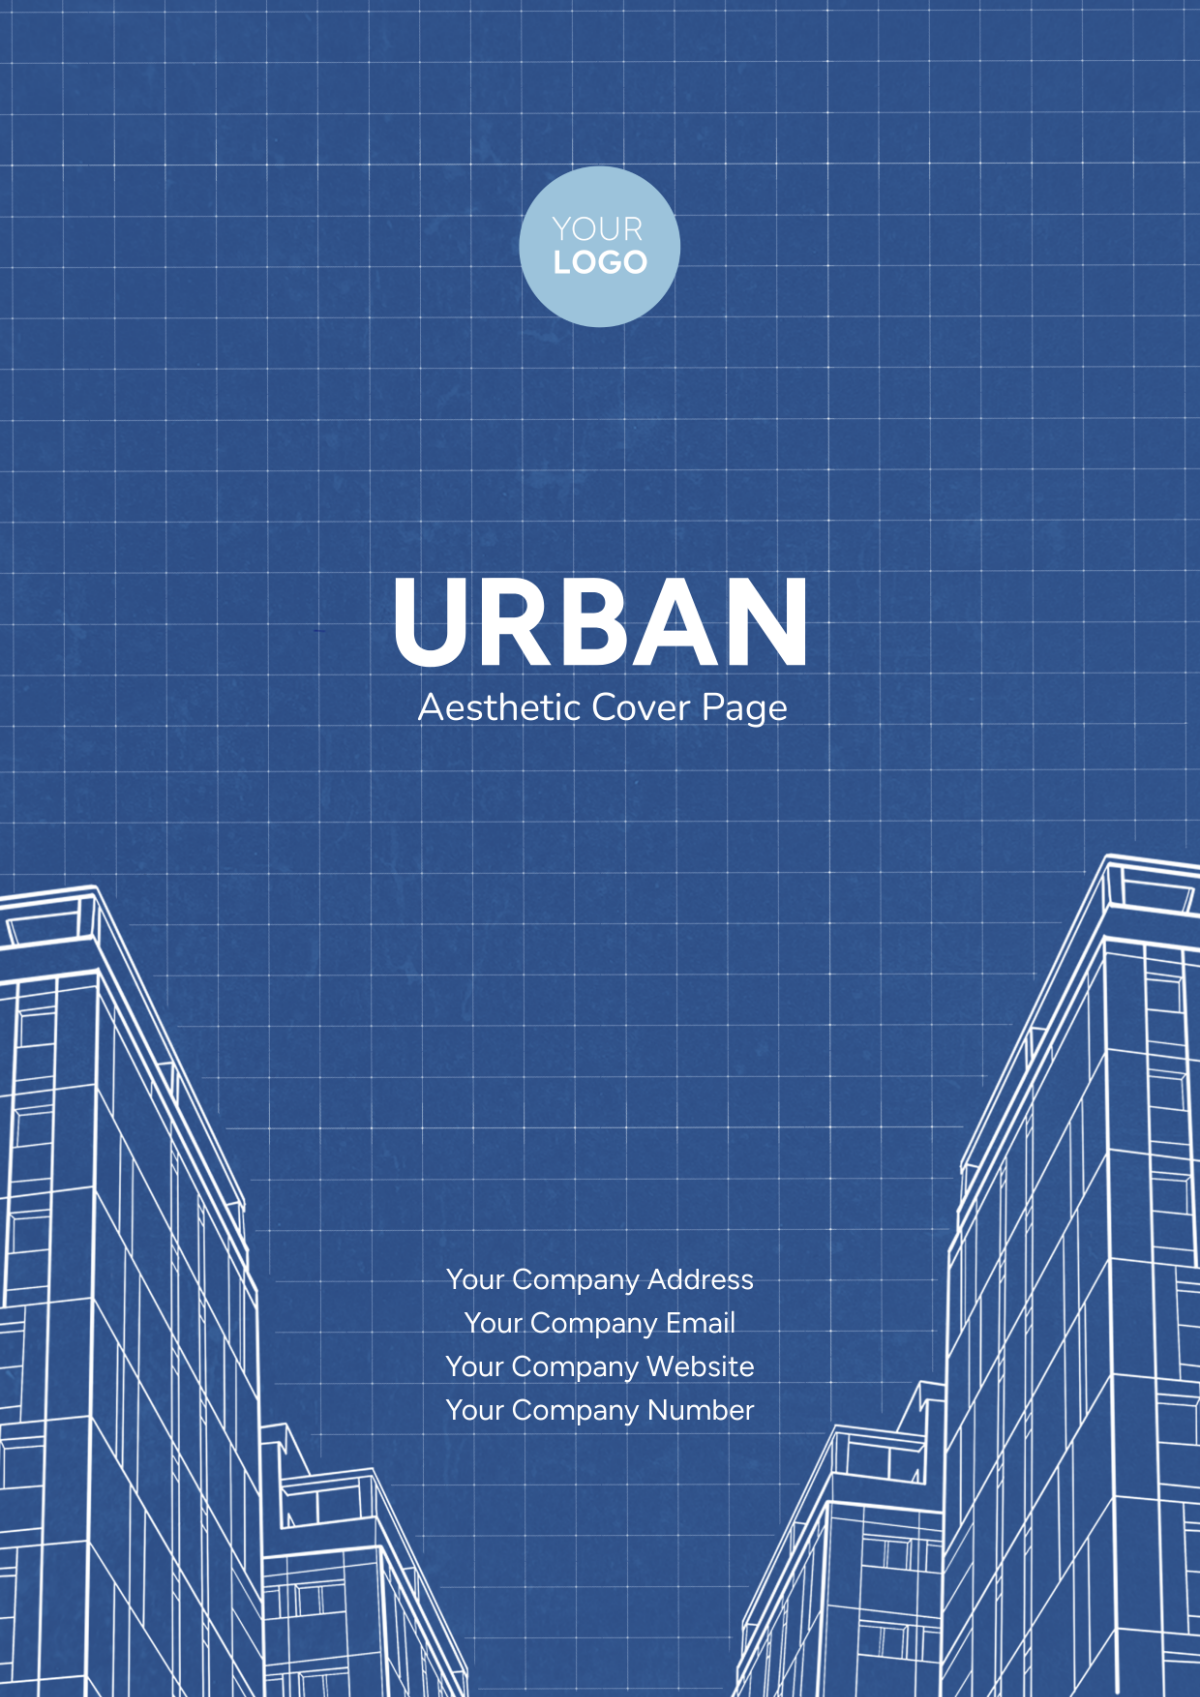 Urban Aesthetic Cover Page